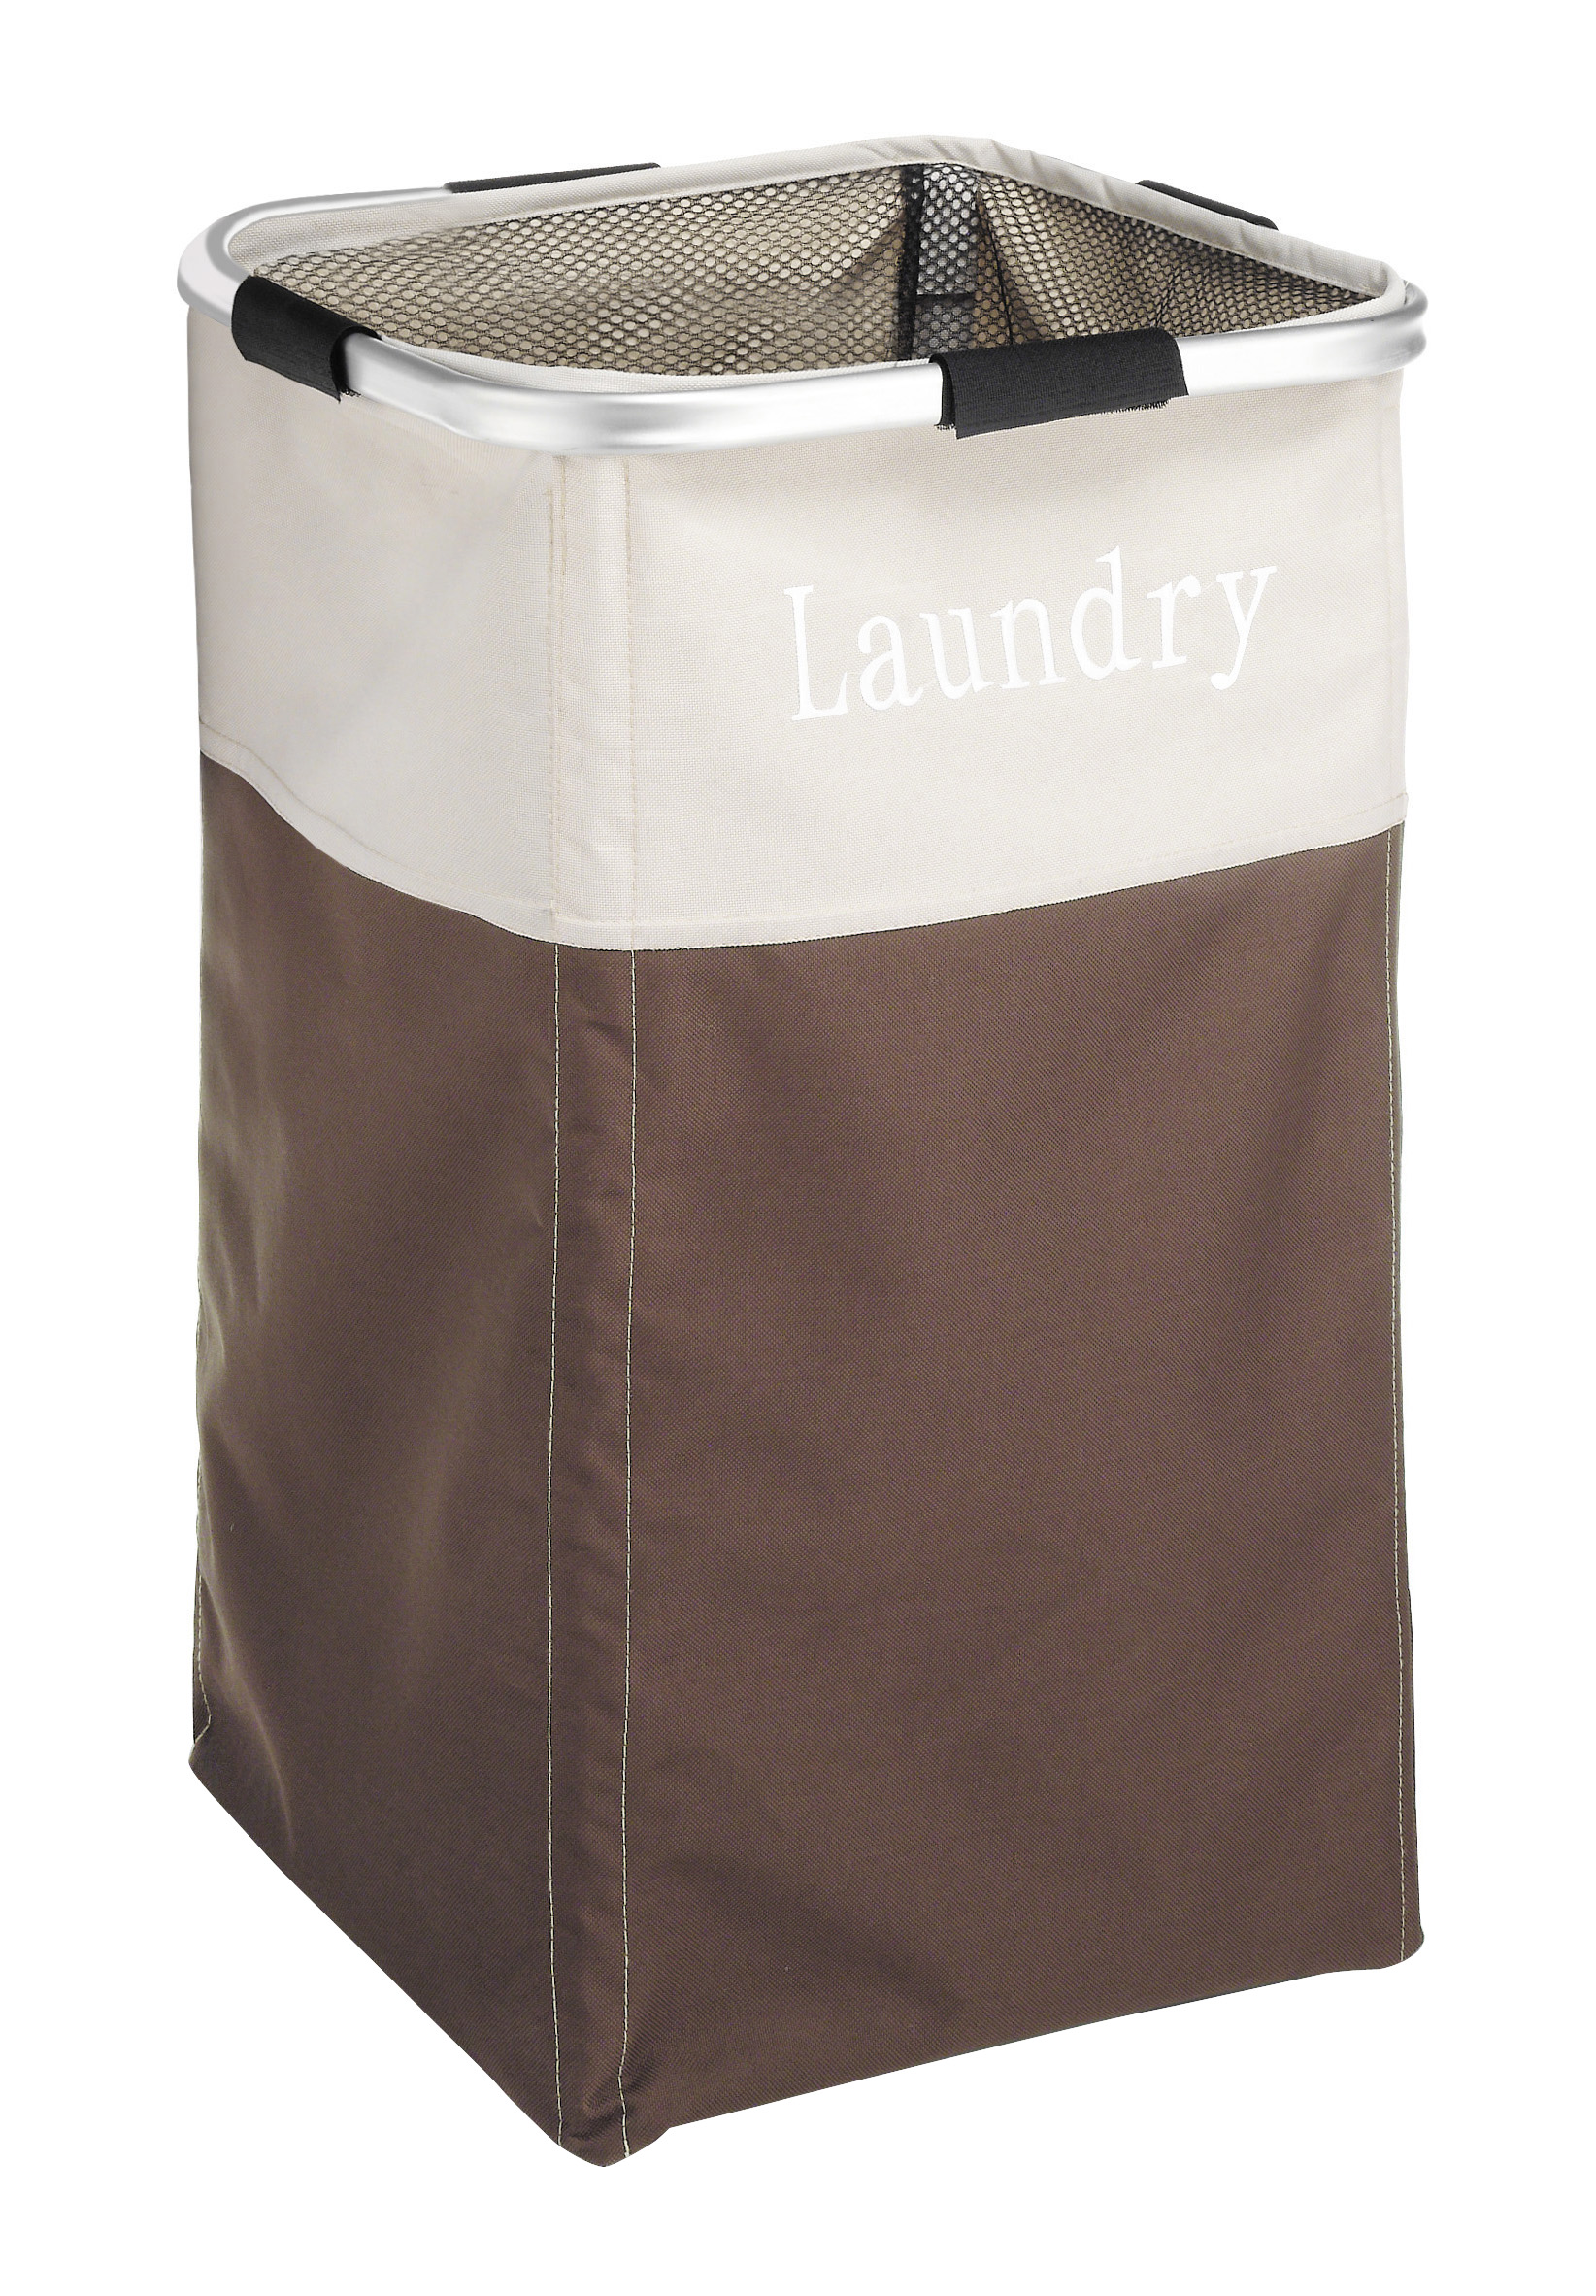 Whitmor Square Polyester Strap Metal Frame Laundry Hamper, Java - For all ages - image 1 of 10